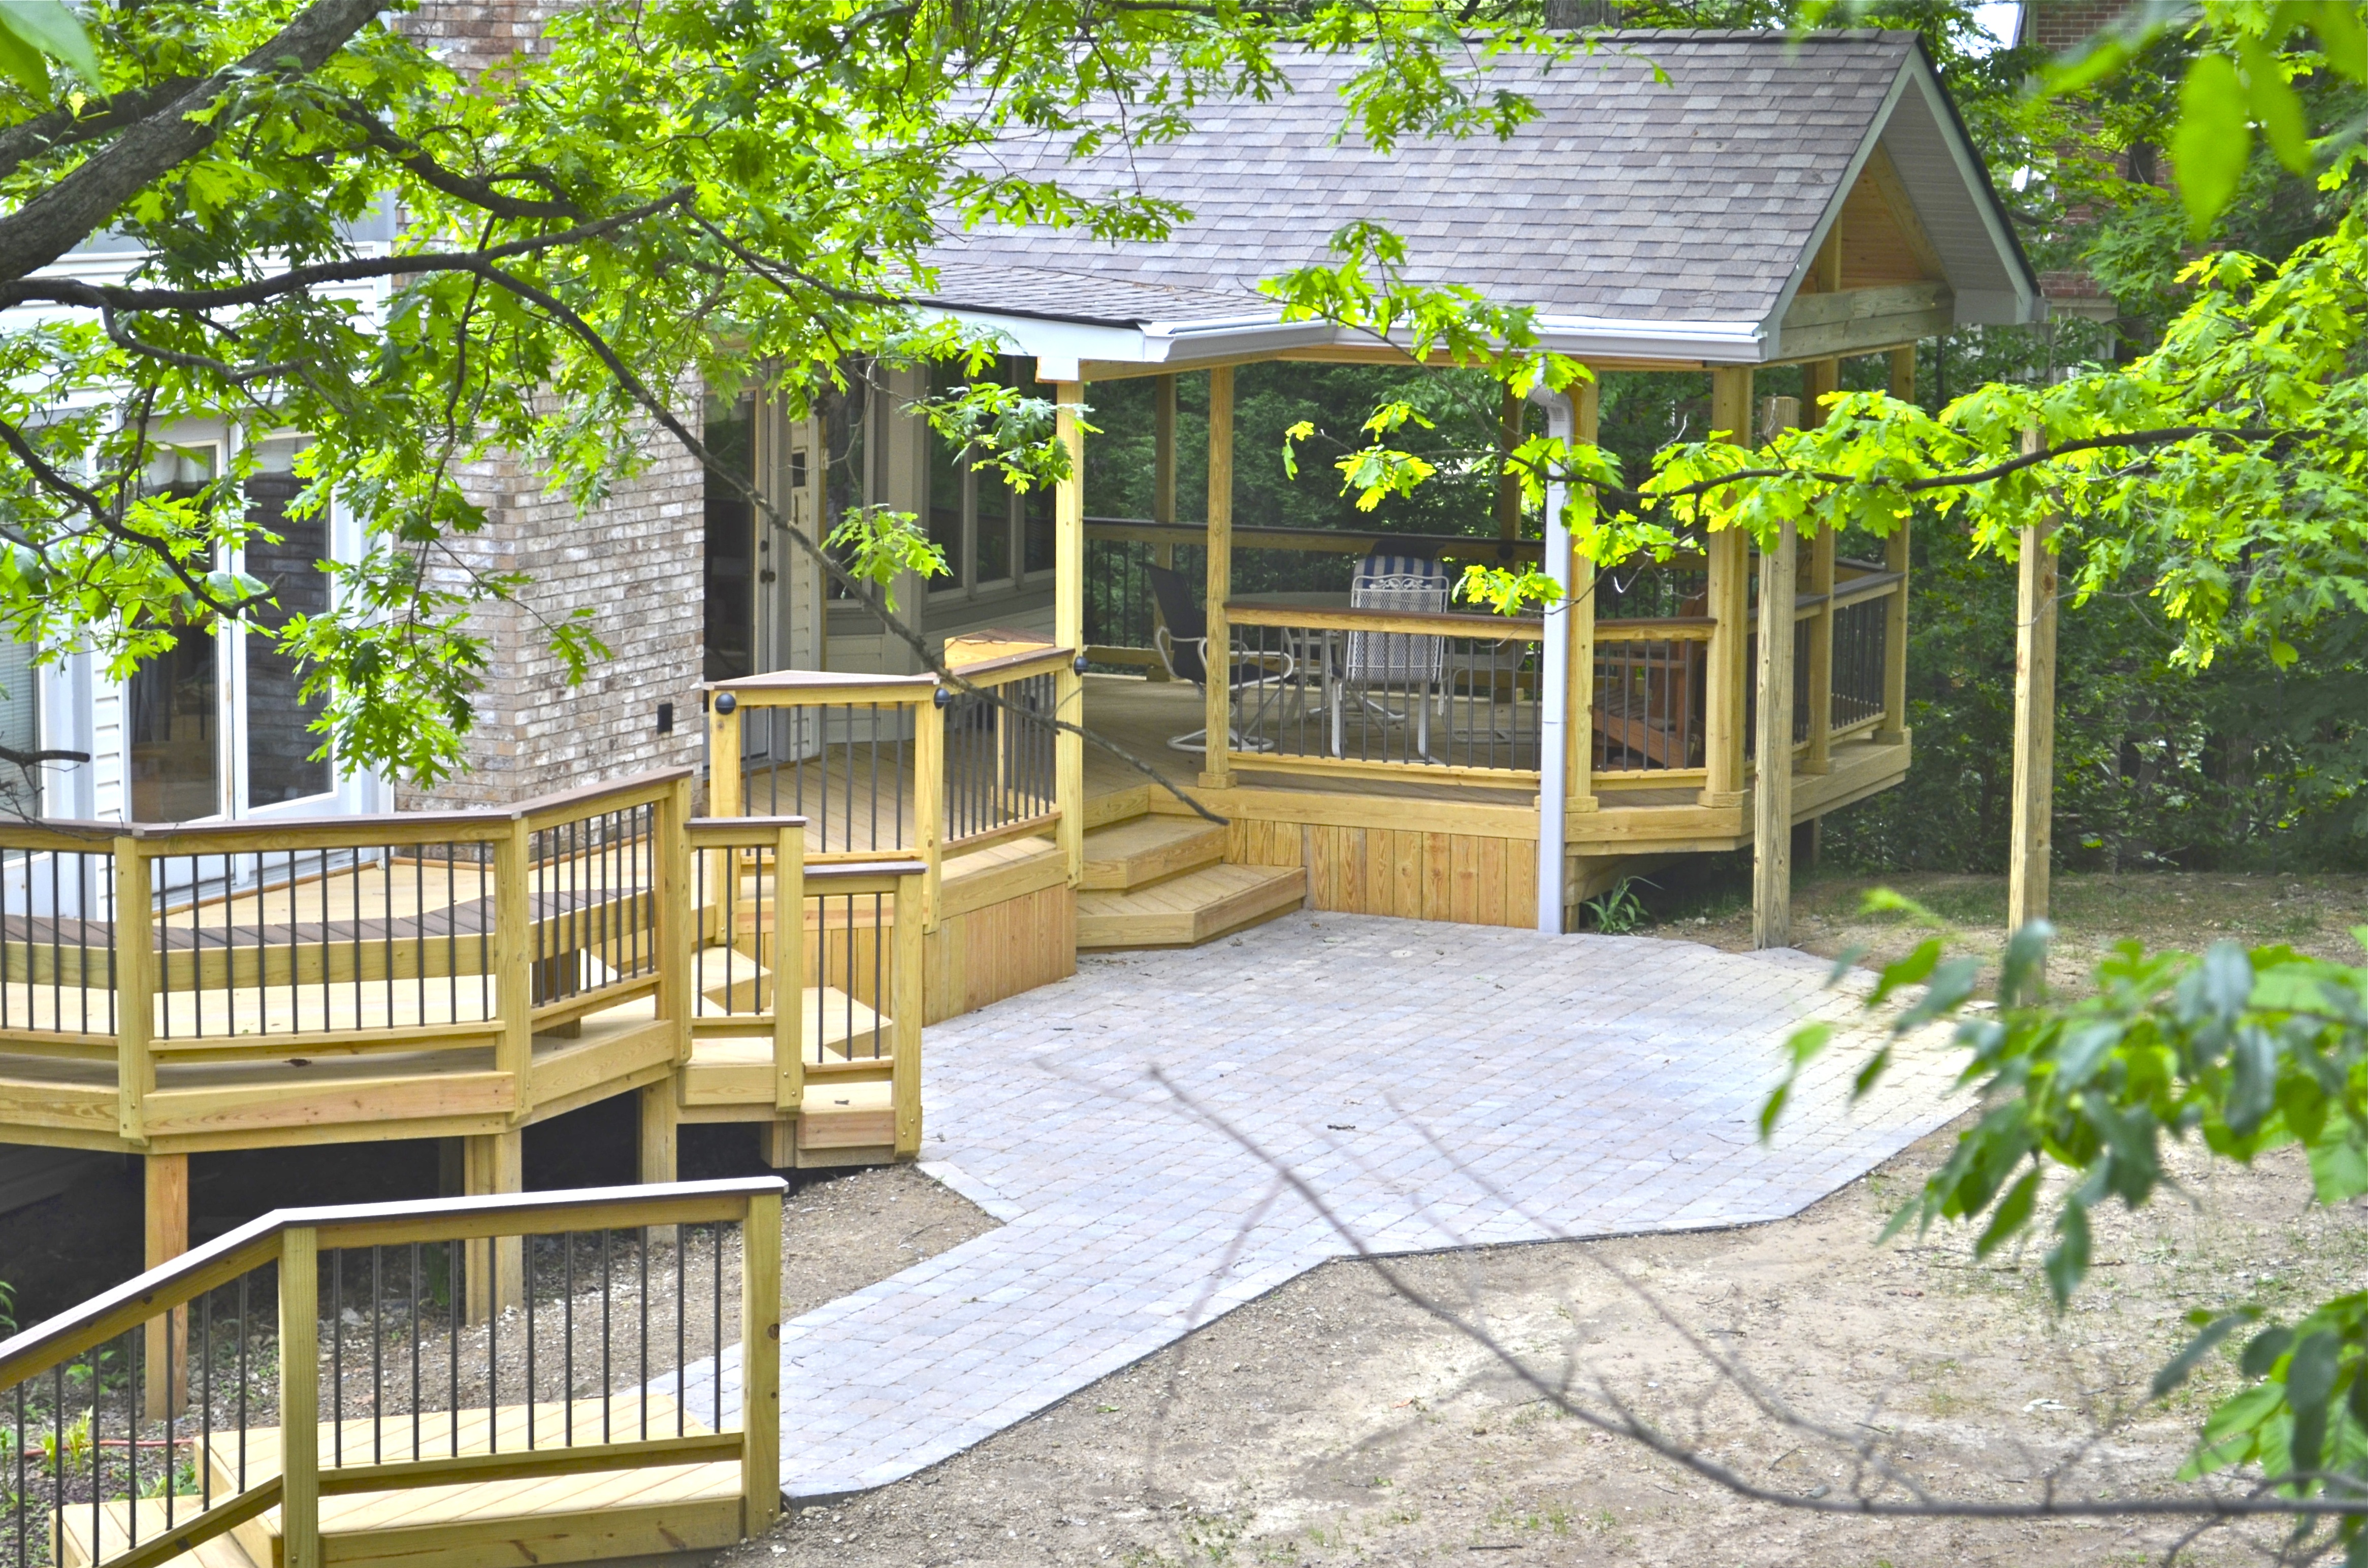 American Deck And Sunroom Paver Patios In Illinois